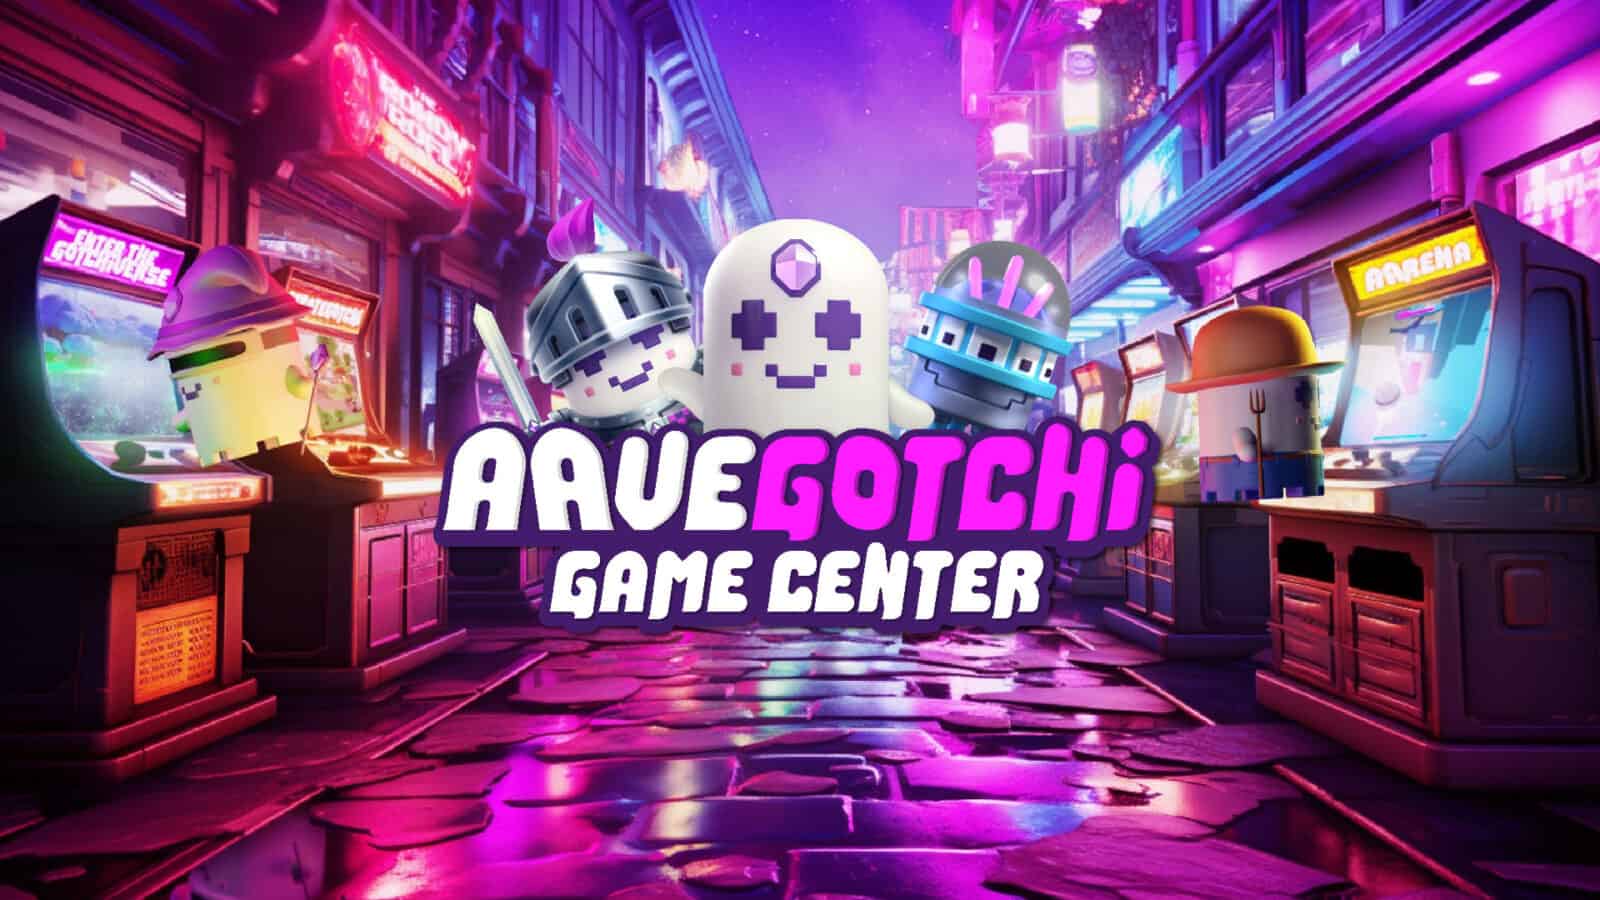 Aavegotchi Introduces Game Center on the Aavegotchi Dapp